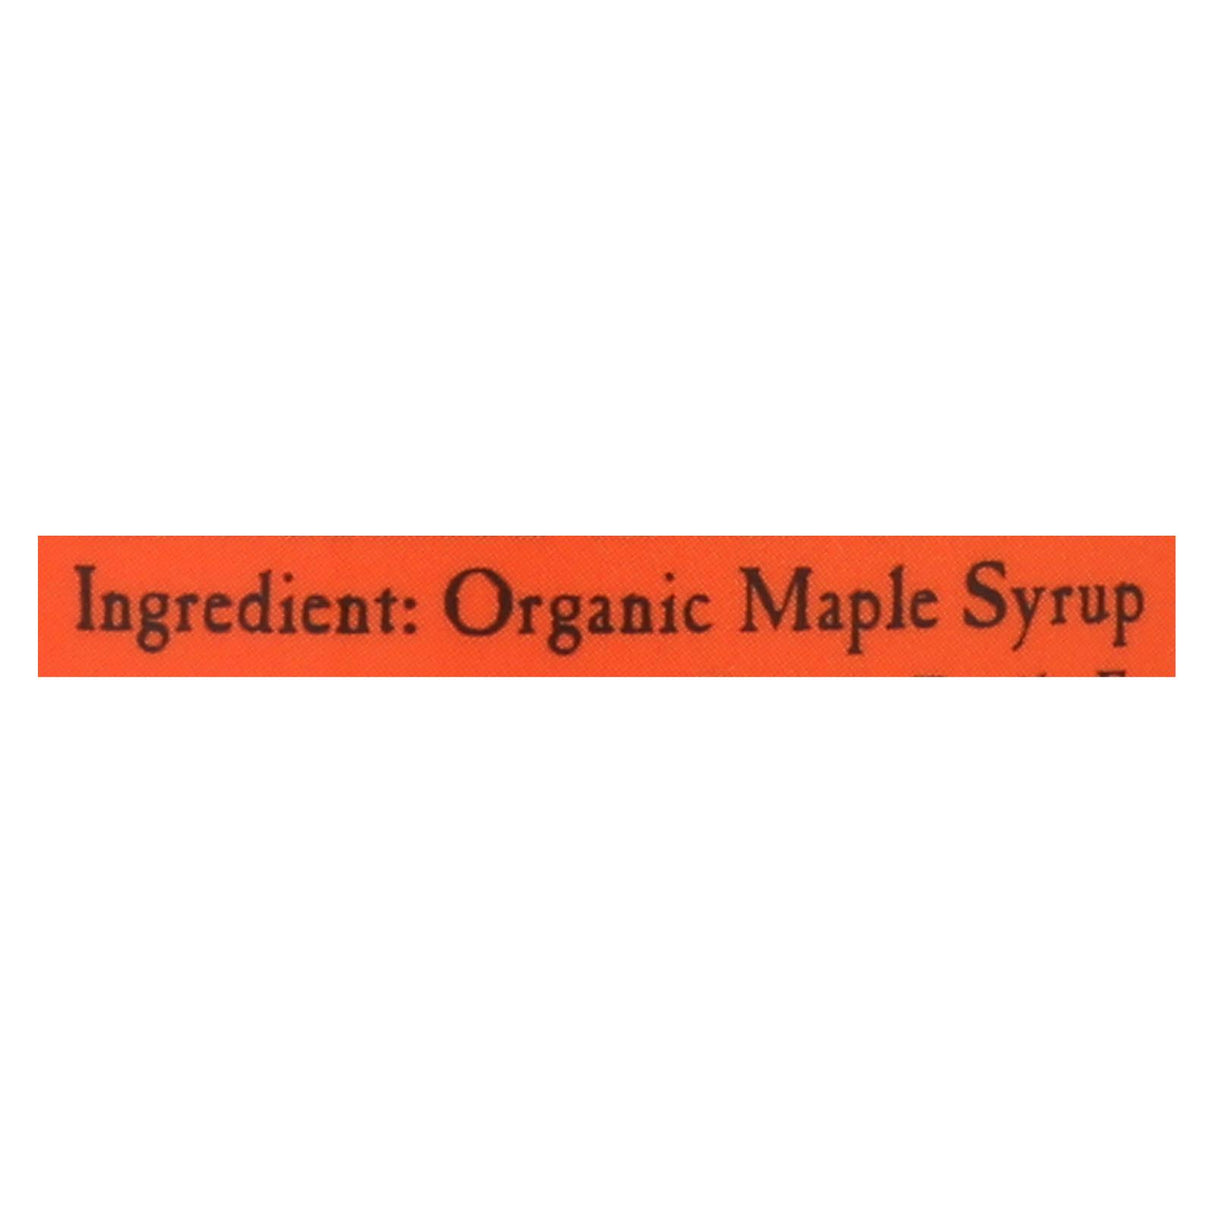 Coombs Family Farms Organic Maple Syrup: Pure Sweetness for a Healthy Life - Case of 6 - 32 fl oz - Cozy Farm 